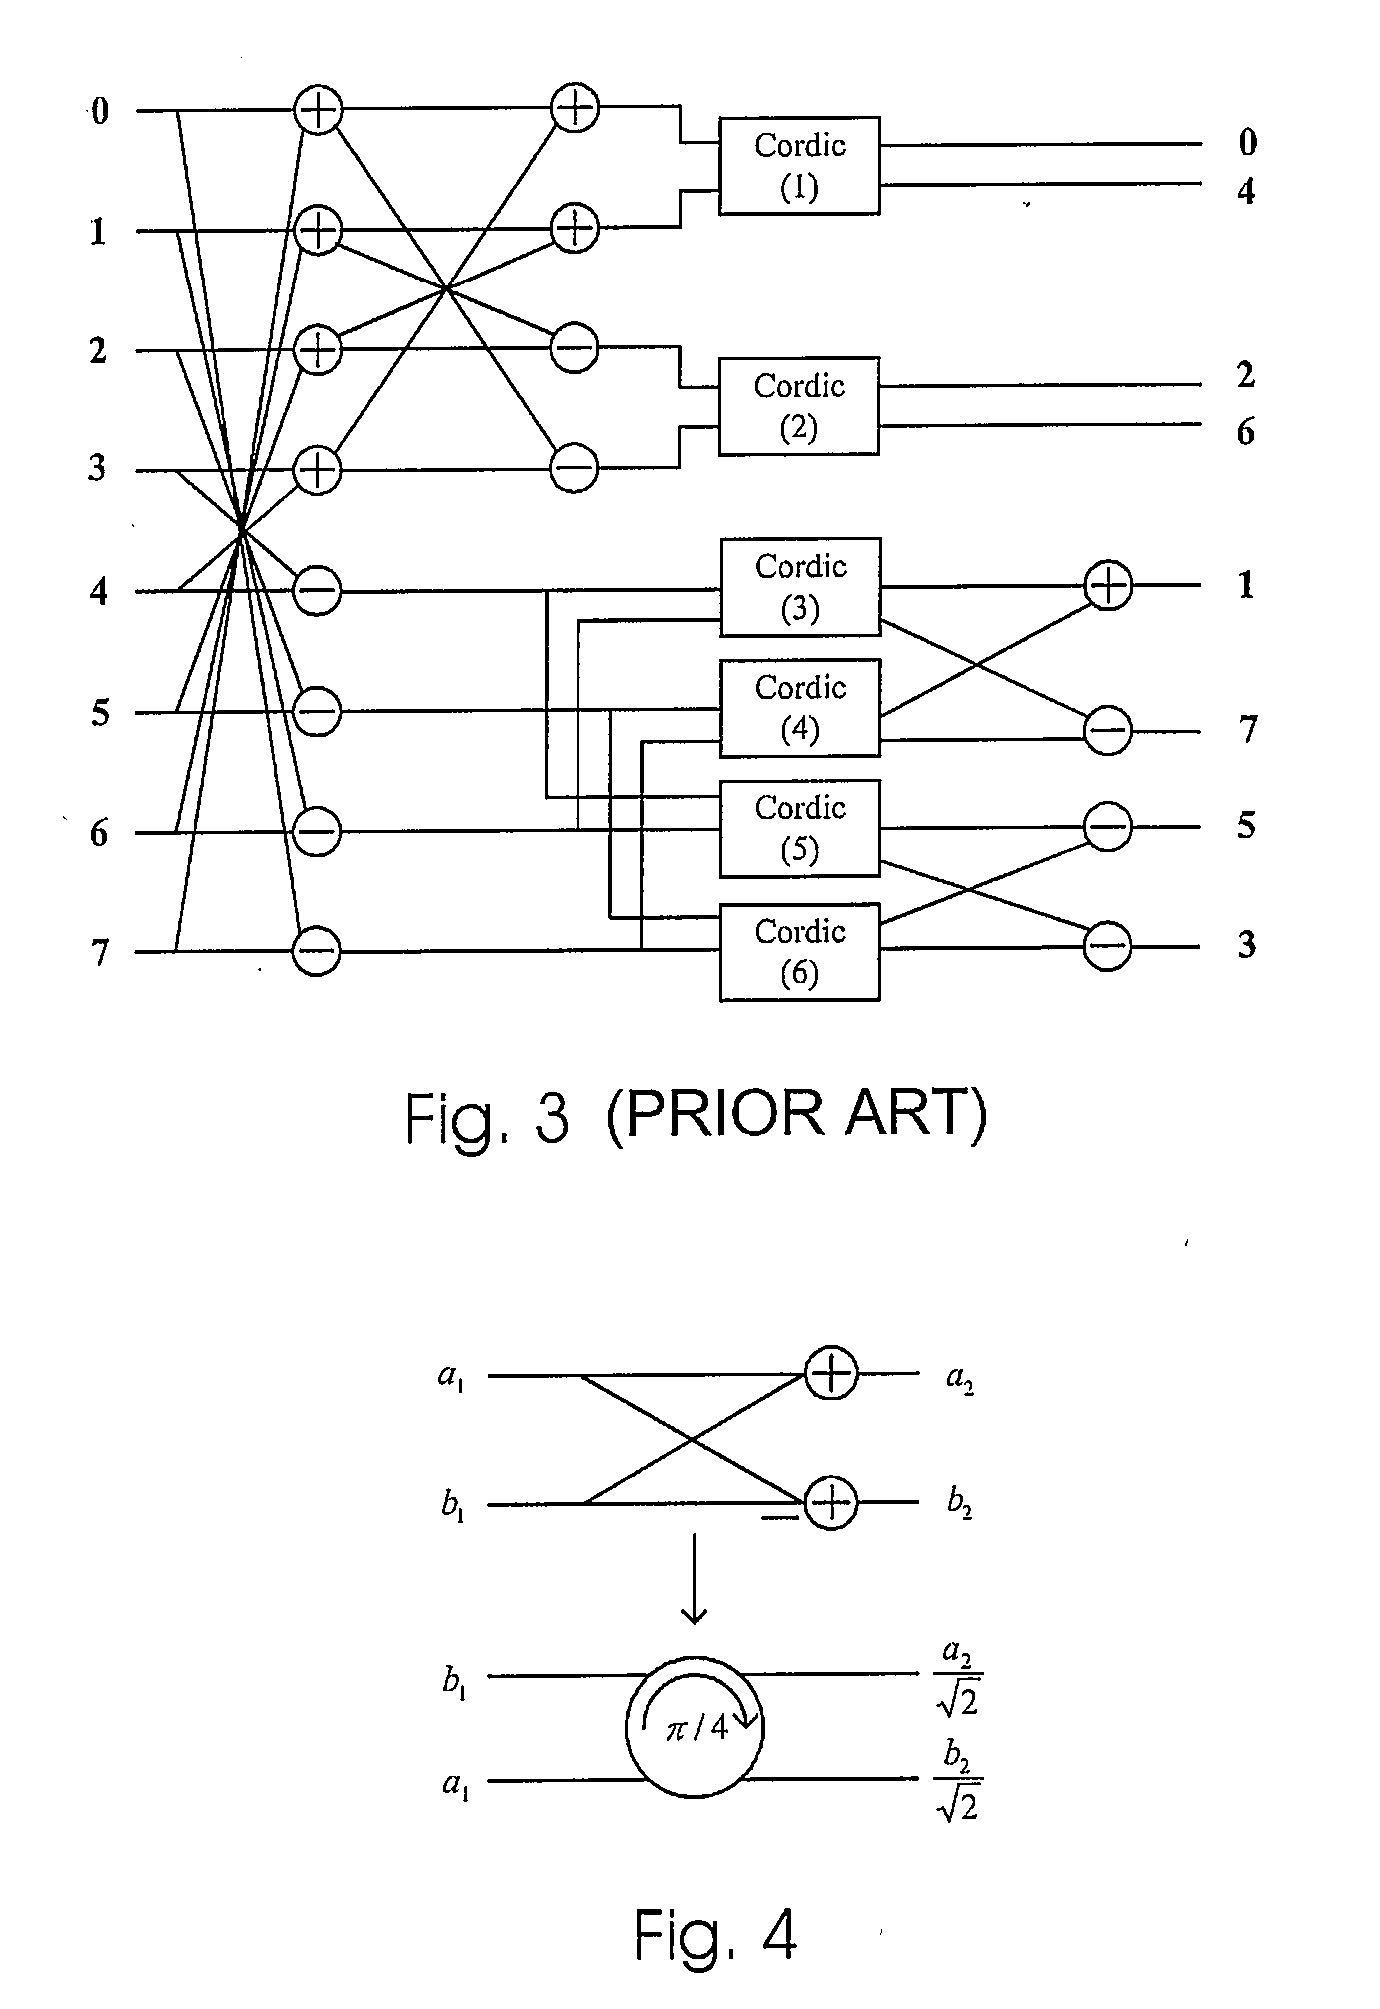 Method and circuit for performing cordic based loeffler discrete cosine transformation (DCT) for signal processing